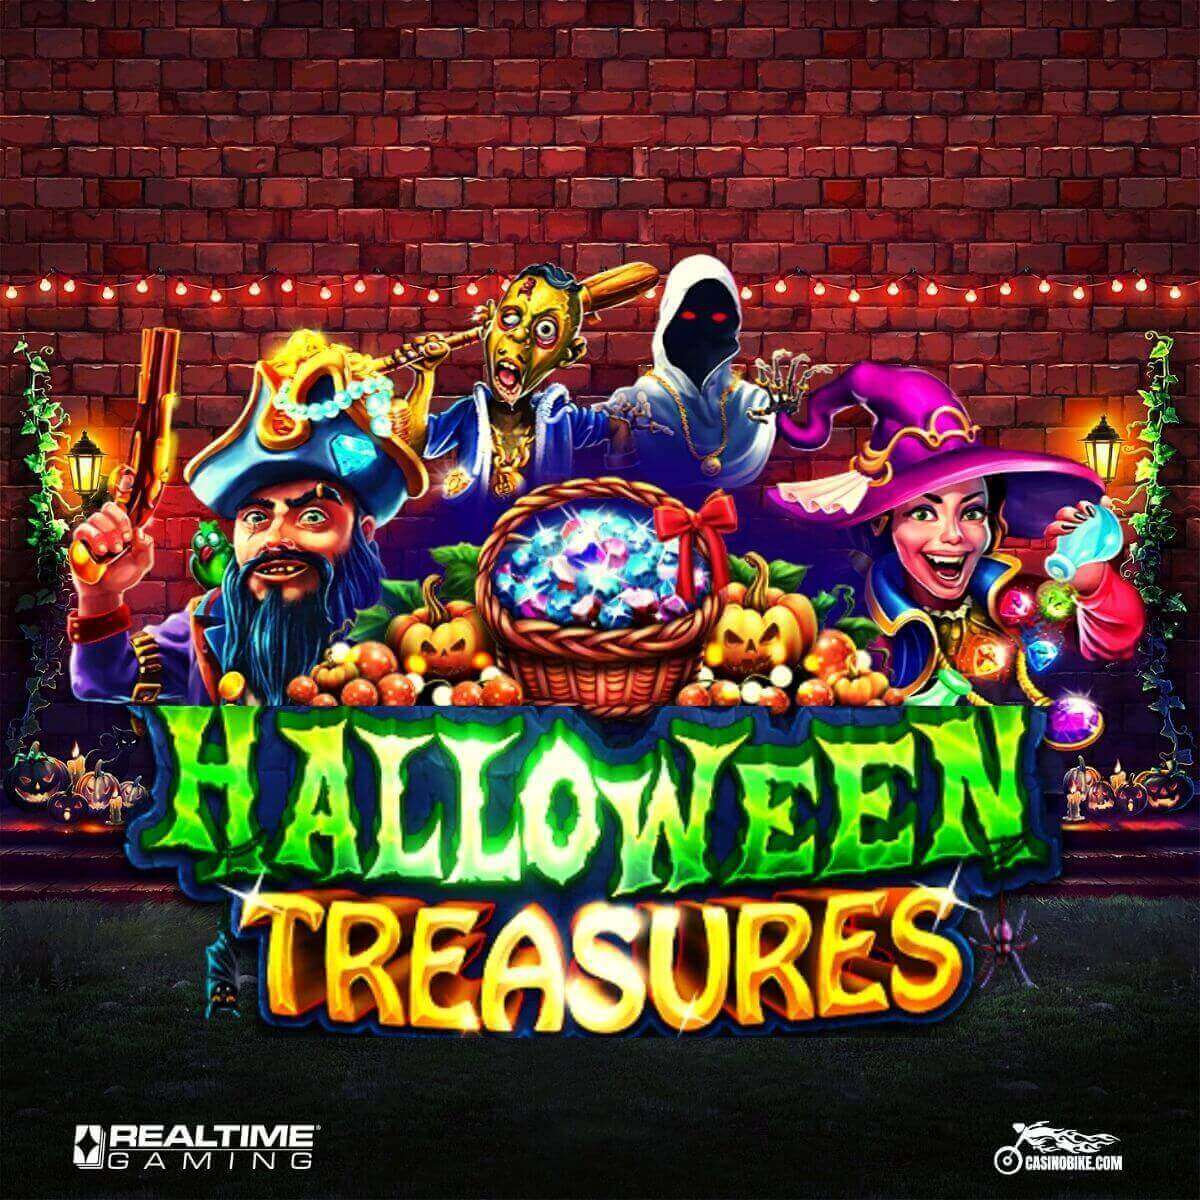 Halloween Treasures Slot by Real Time Gaming